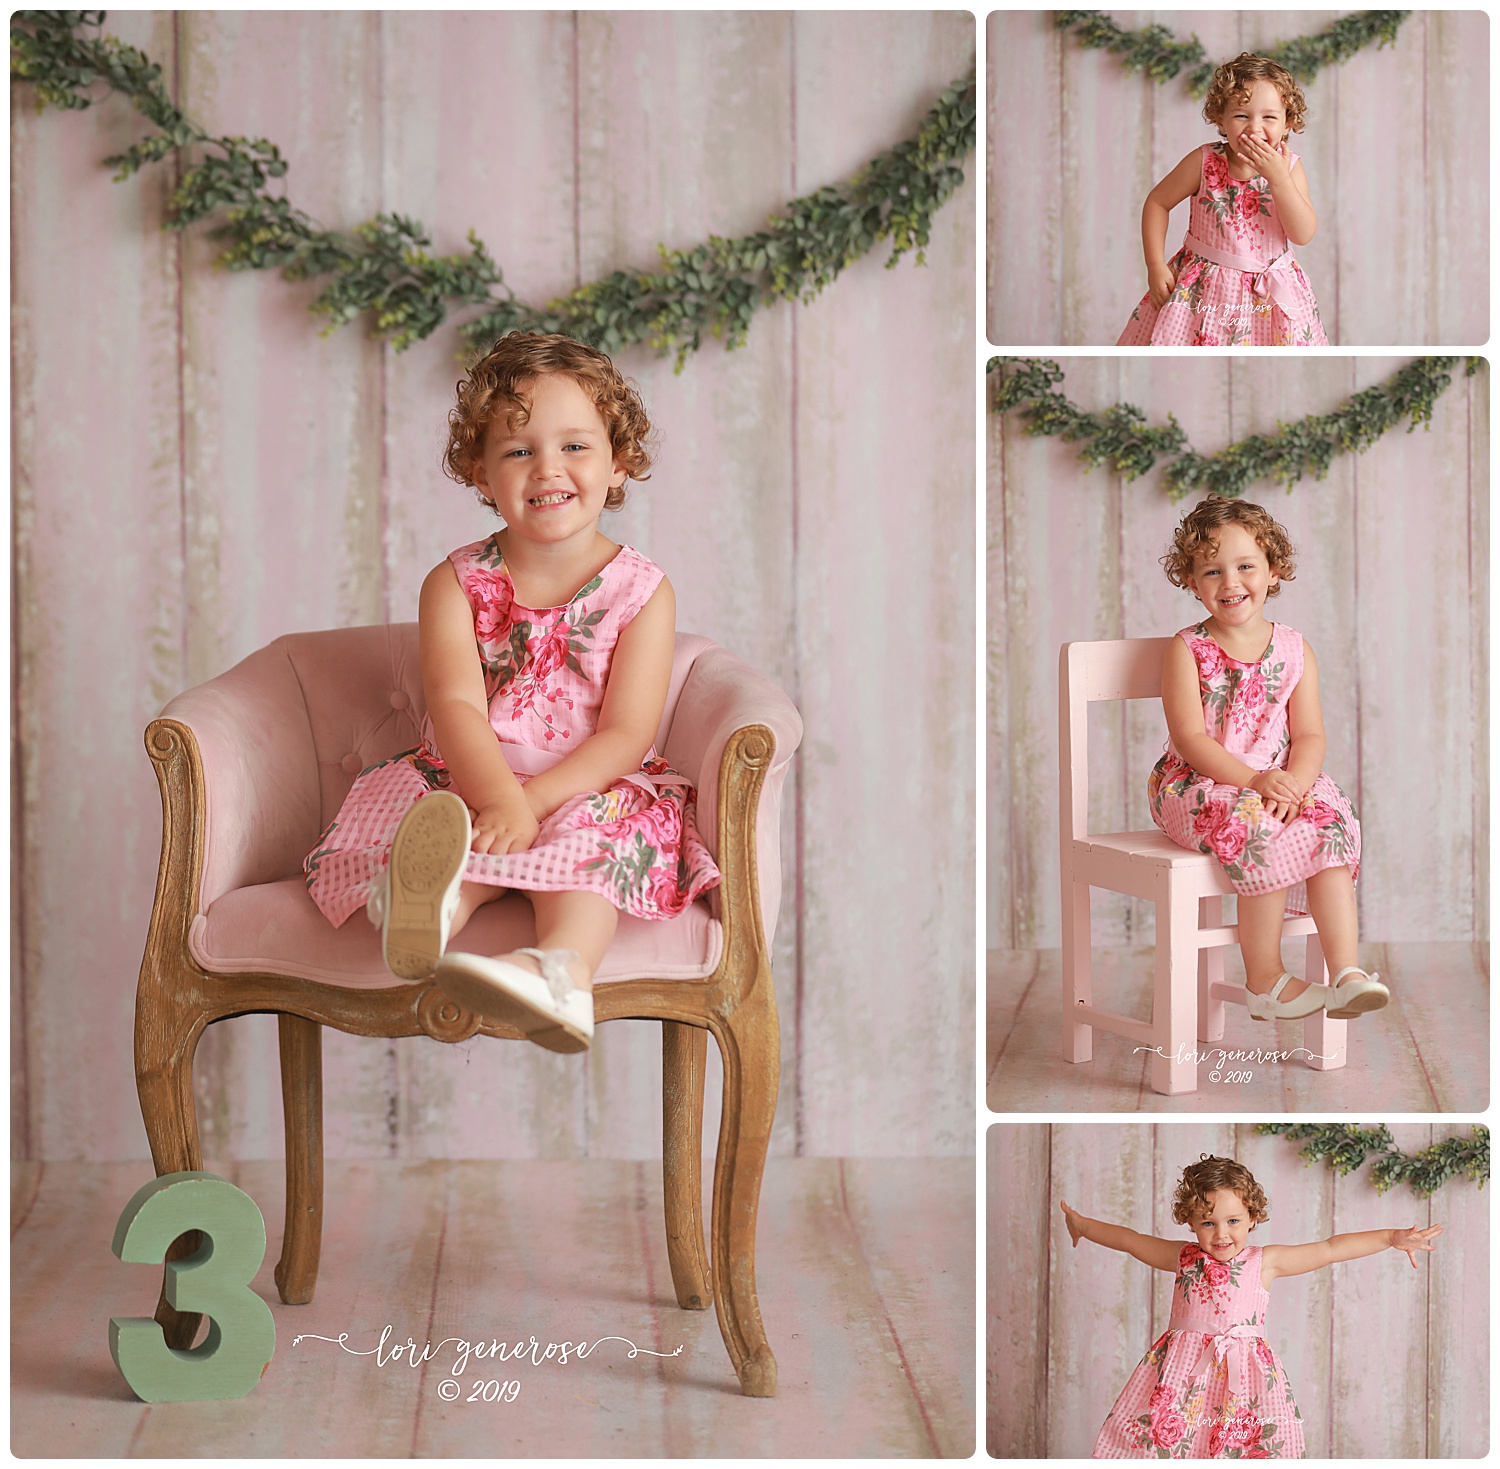 My girlie Sloane, three already! Love how simple and perfect this session was!